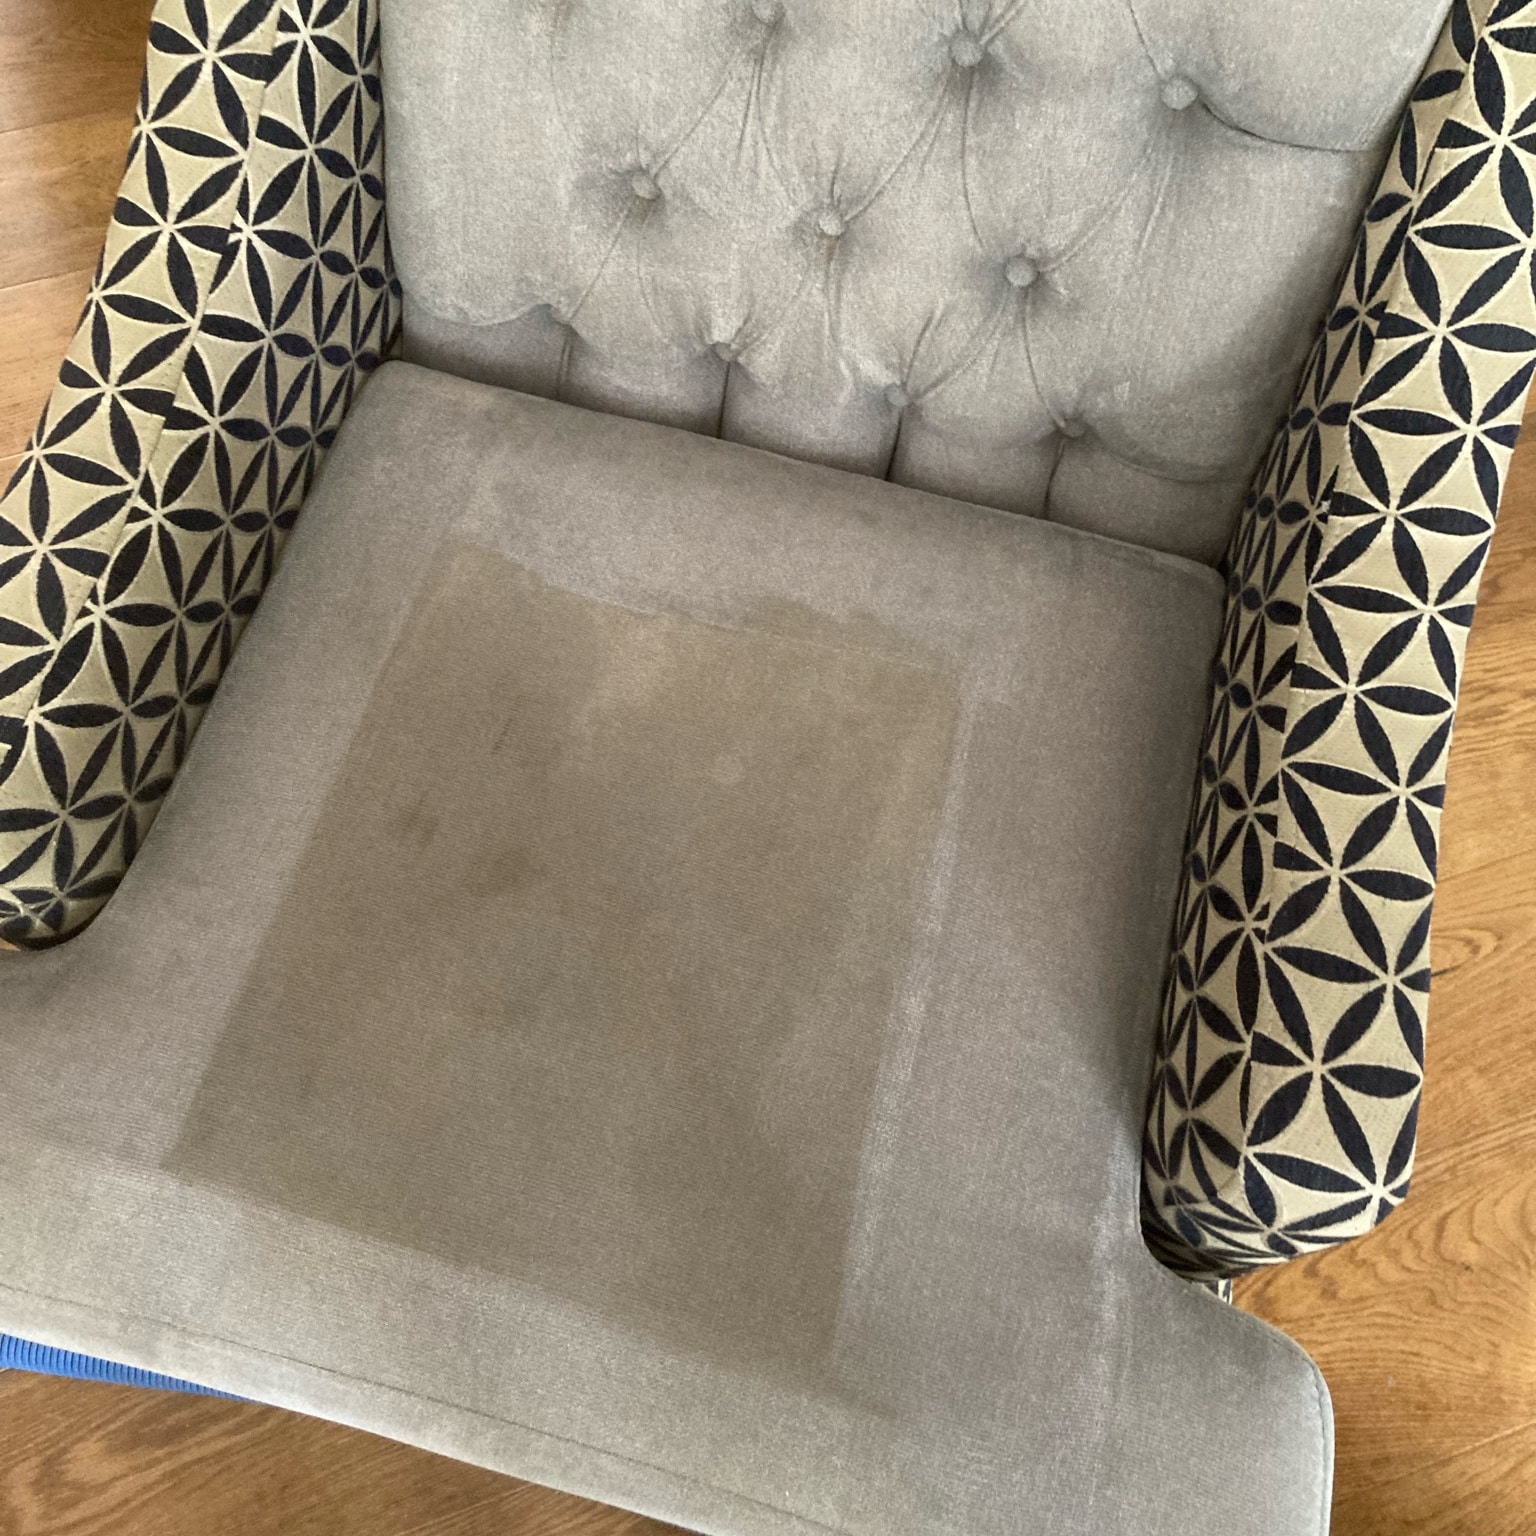 upholstery chair cleaning in Scottsdale, Arizona